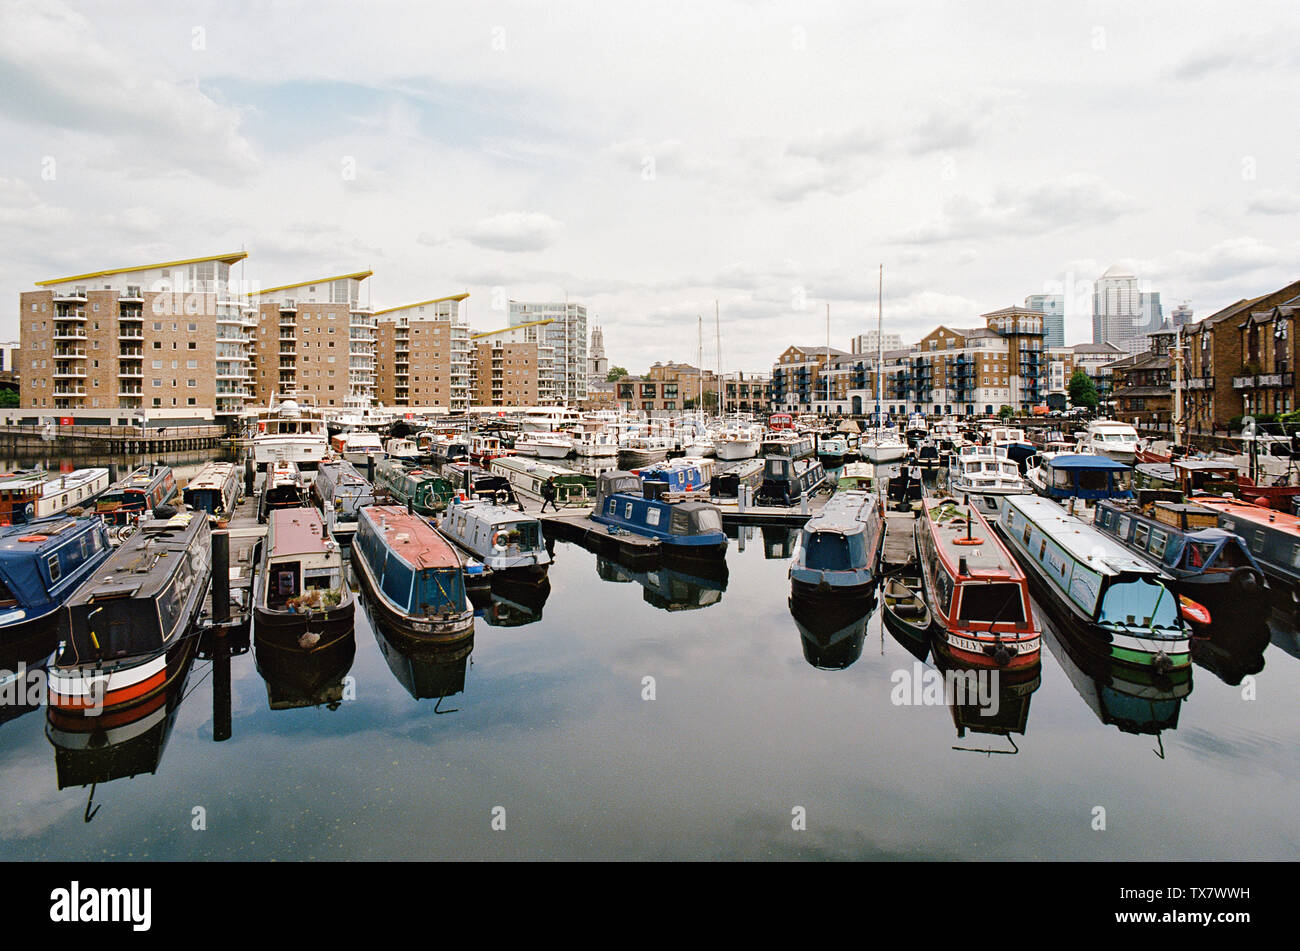 Narrowboats moored in Limehouse Basin in London's East End, looking east towards Canary Wharf and Limeouse church Stock Photo